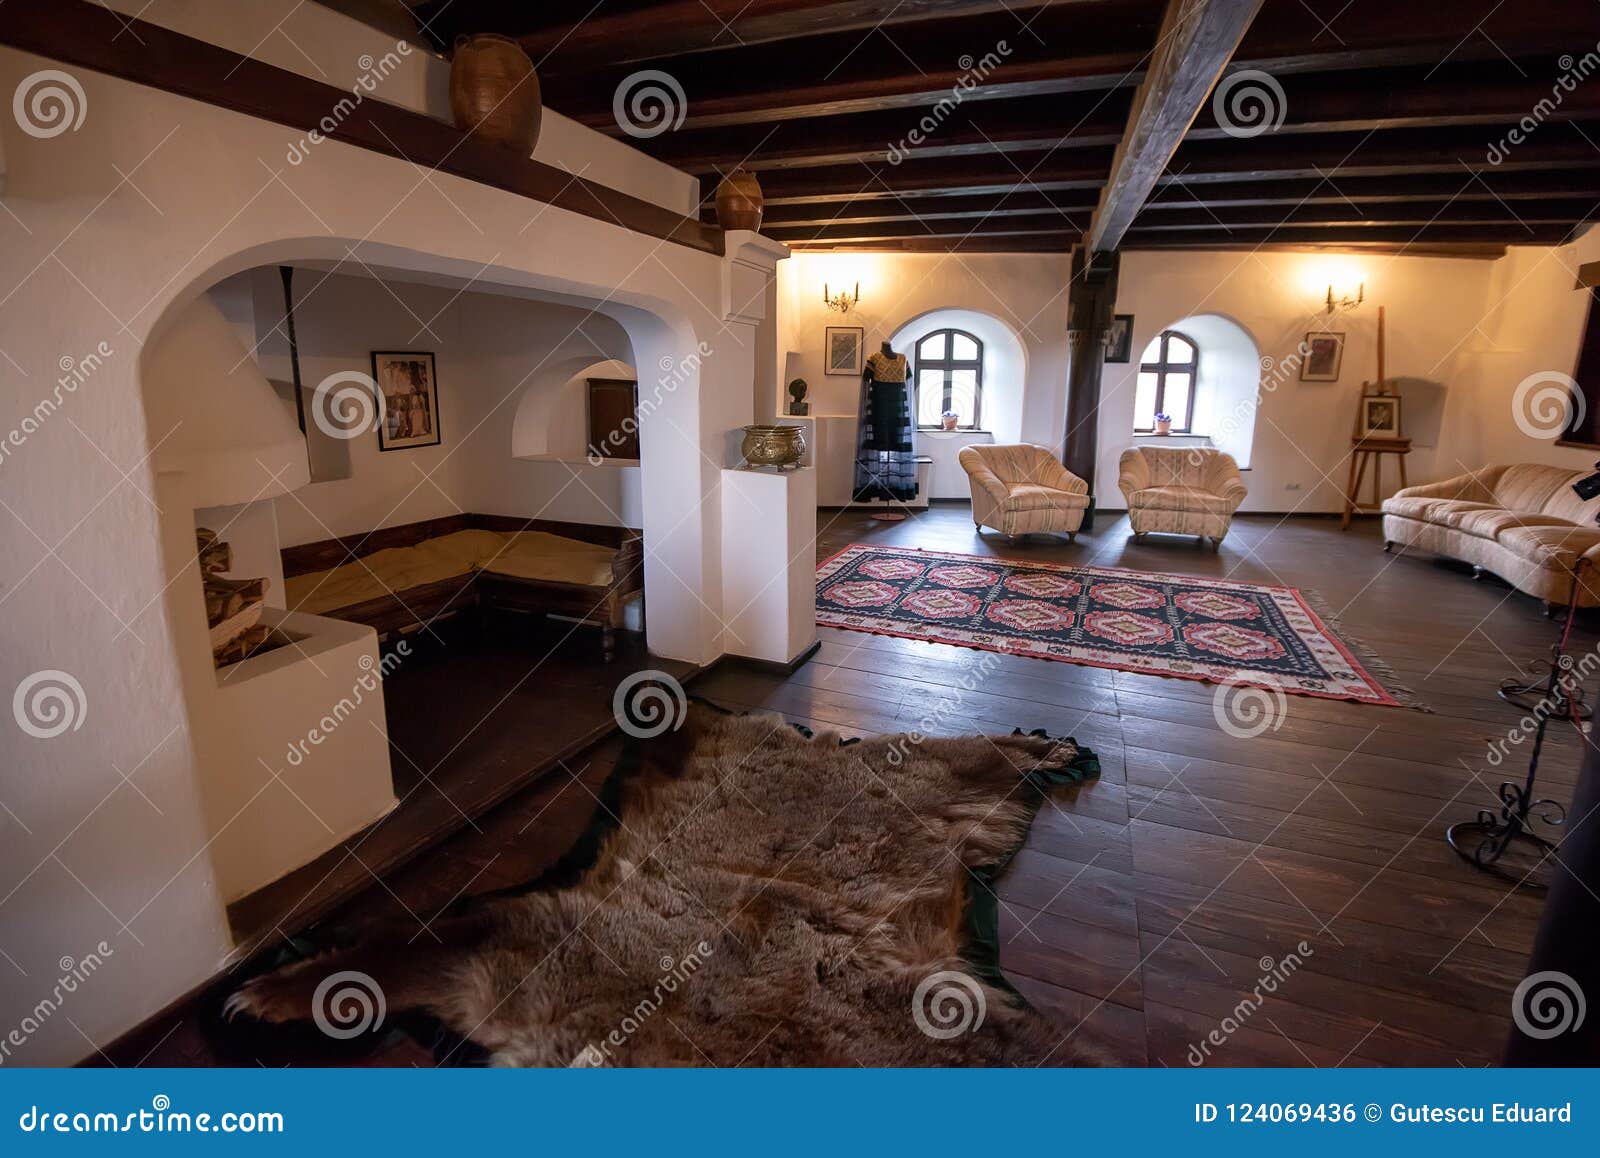 Inside View Of Bran Castle From Romania Also Known As